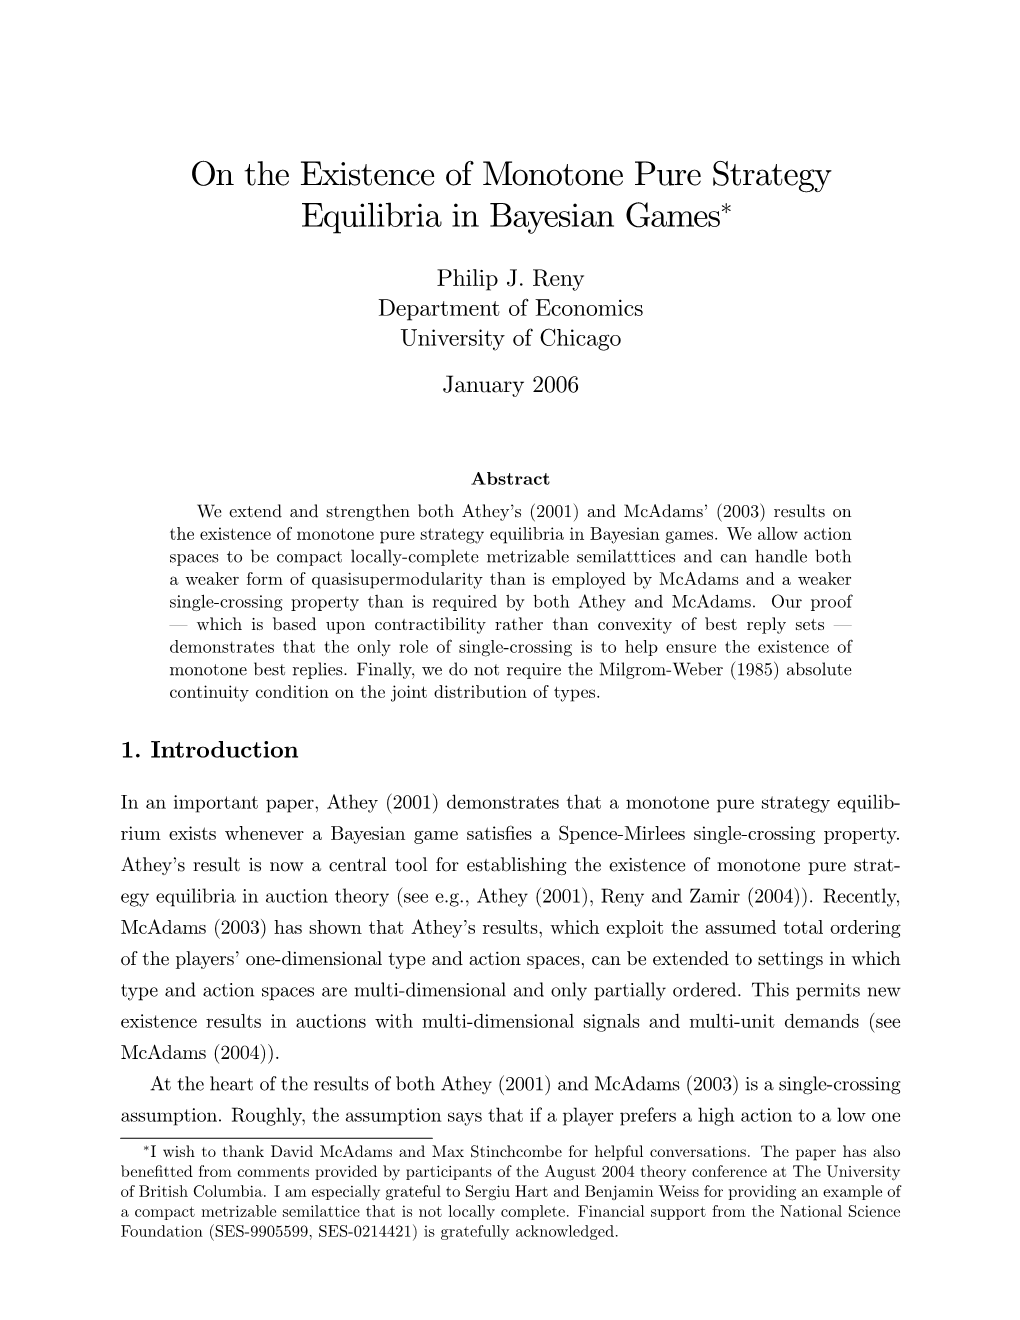 On the Existence of Monotone Pure Strategy Equilibria in Bayesian Games